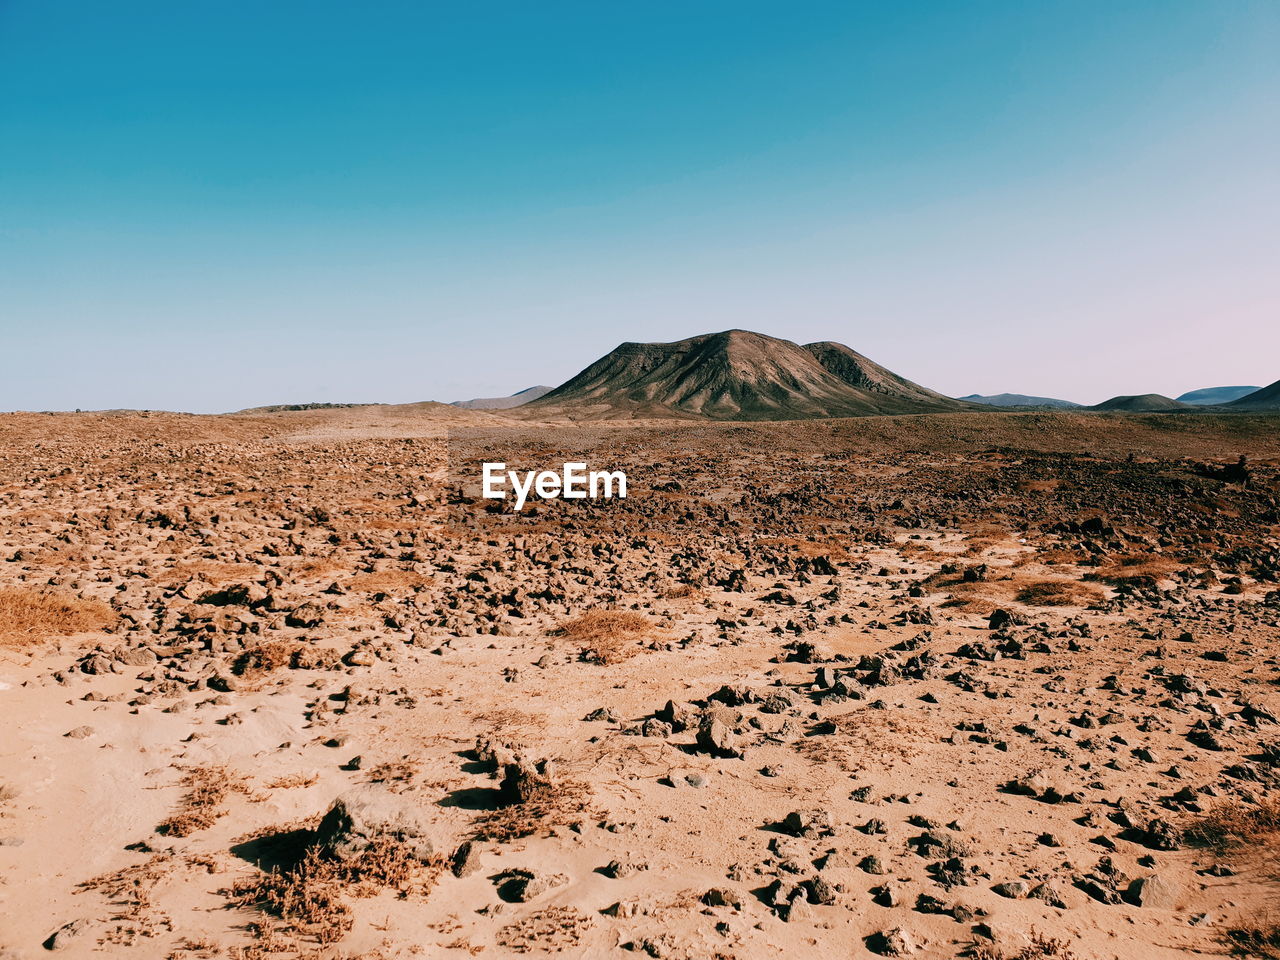 SCENIC VIEW OF ARID LANDSCAPE AGAINST SKY